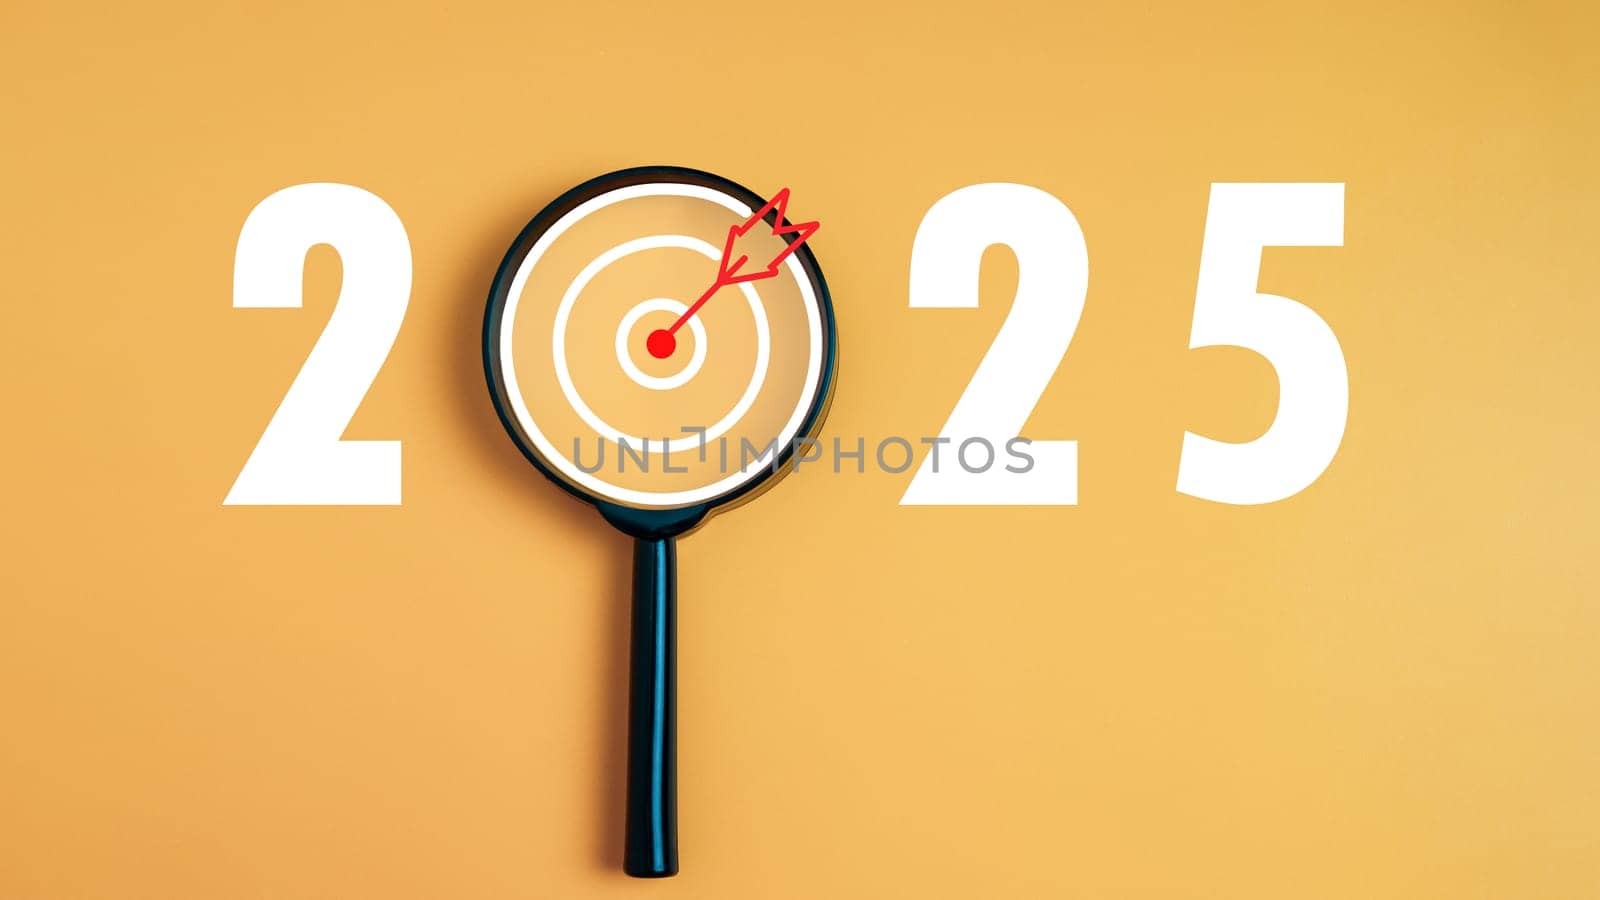 Dartboard icon in a magnifying glass centered on the number 2025 on a yellow background. Represents the goal setting for 2025, concept of a start. financial planning, strategy business, goal setting. by Unimages2527